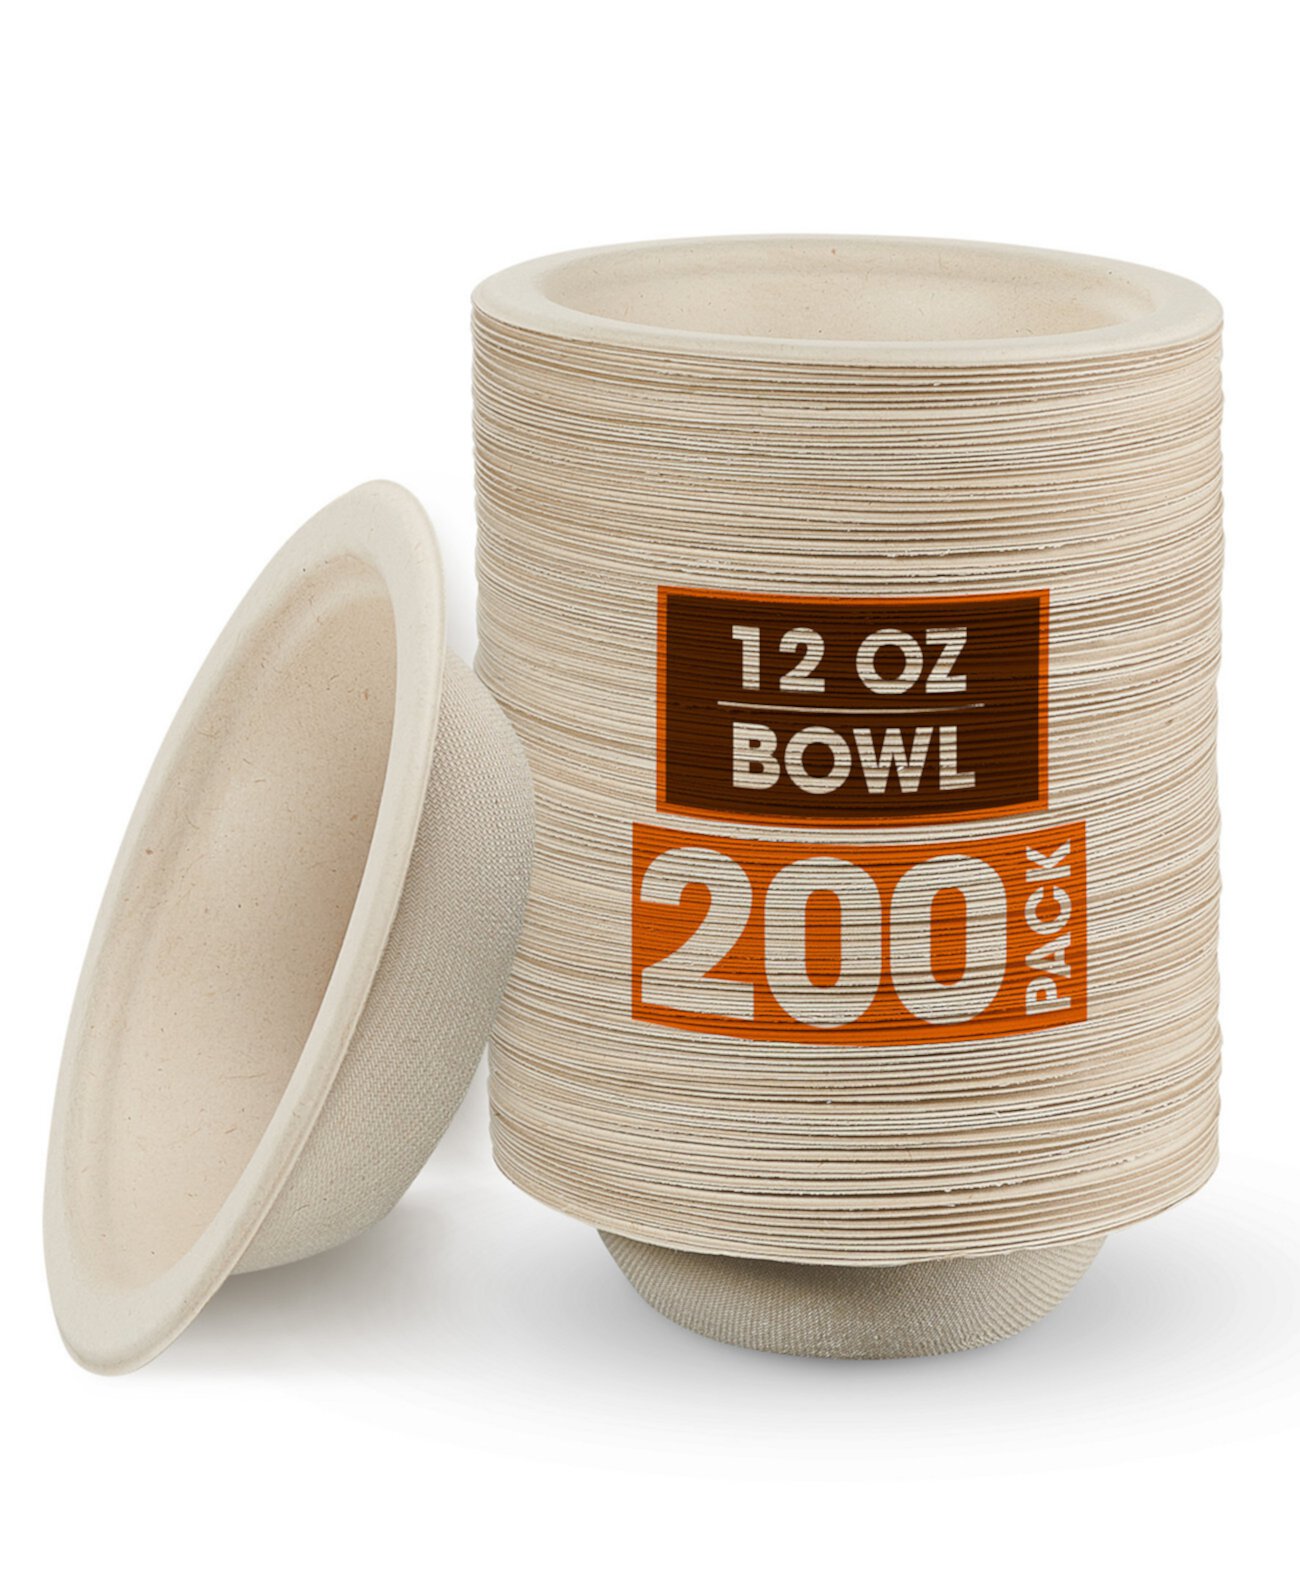 12 oz Paper Bowls, 200 Pack Cheer Collection